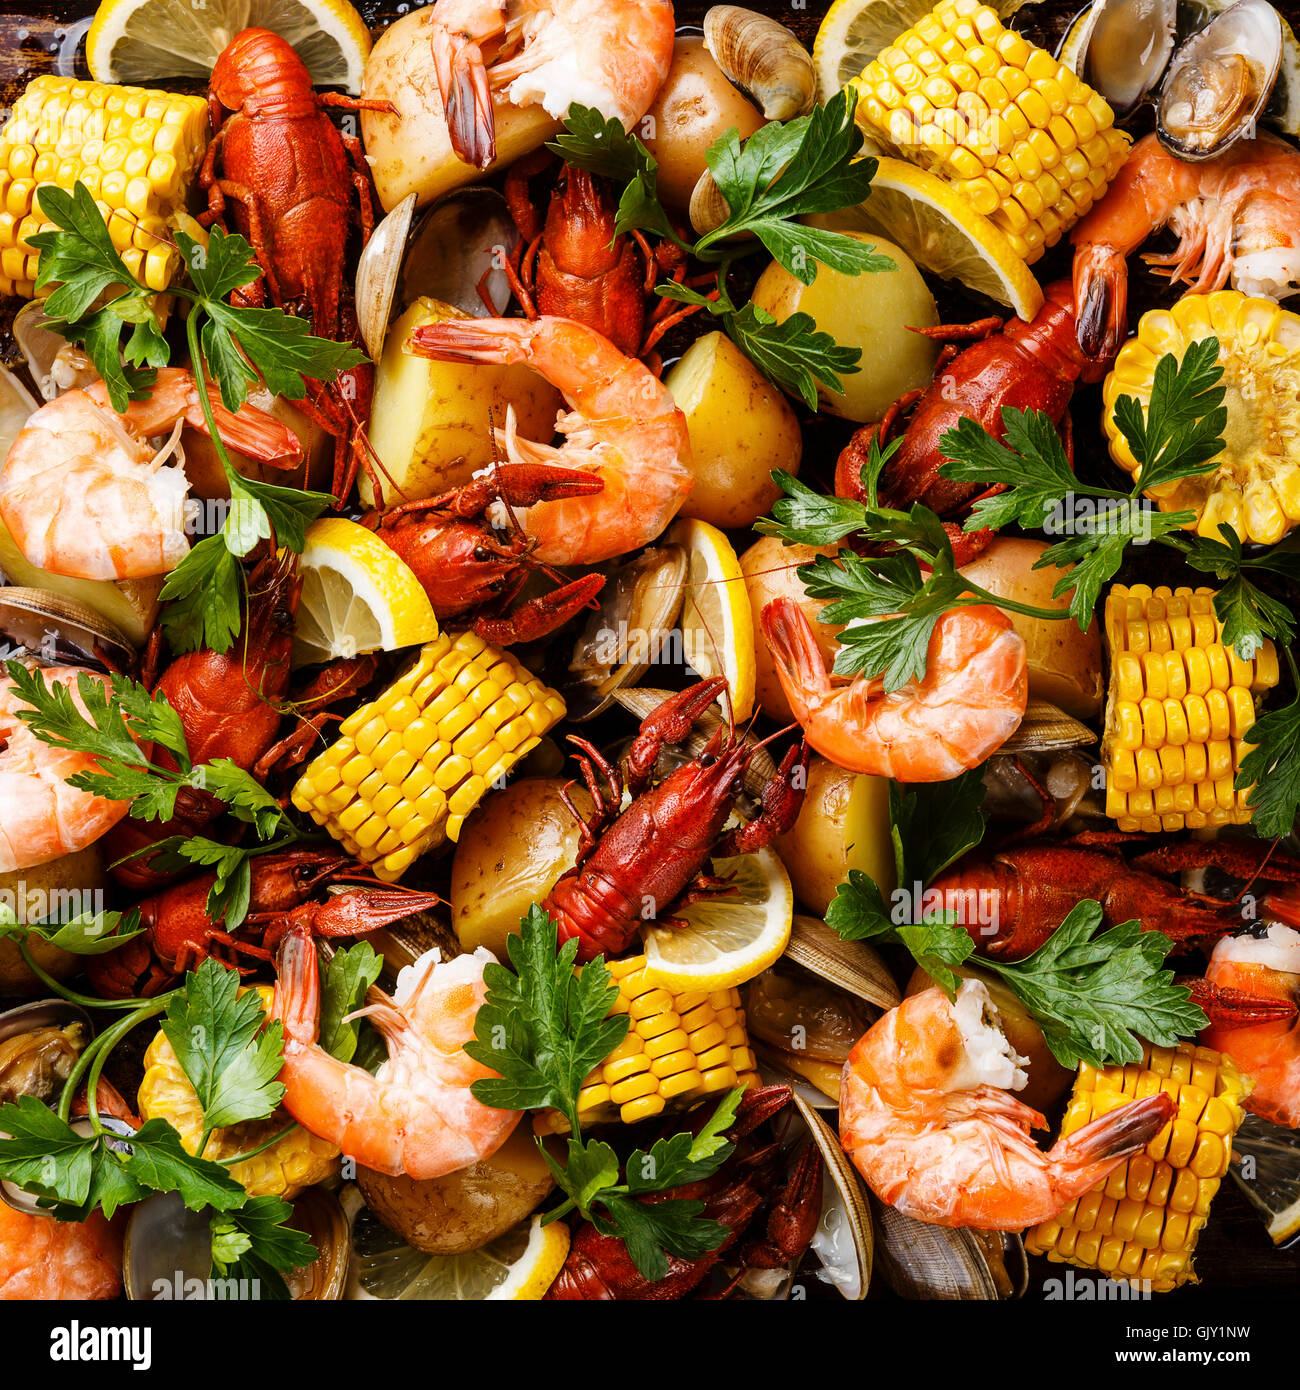 Clambake Seafood boil with Corn on the cob, Potatoes, Prawns, Crayfish and Clams Stock Photo